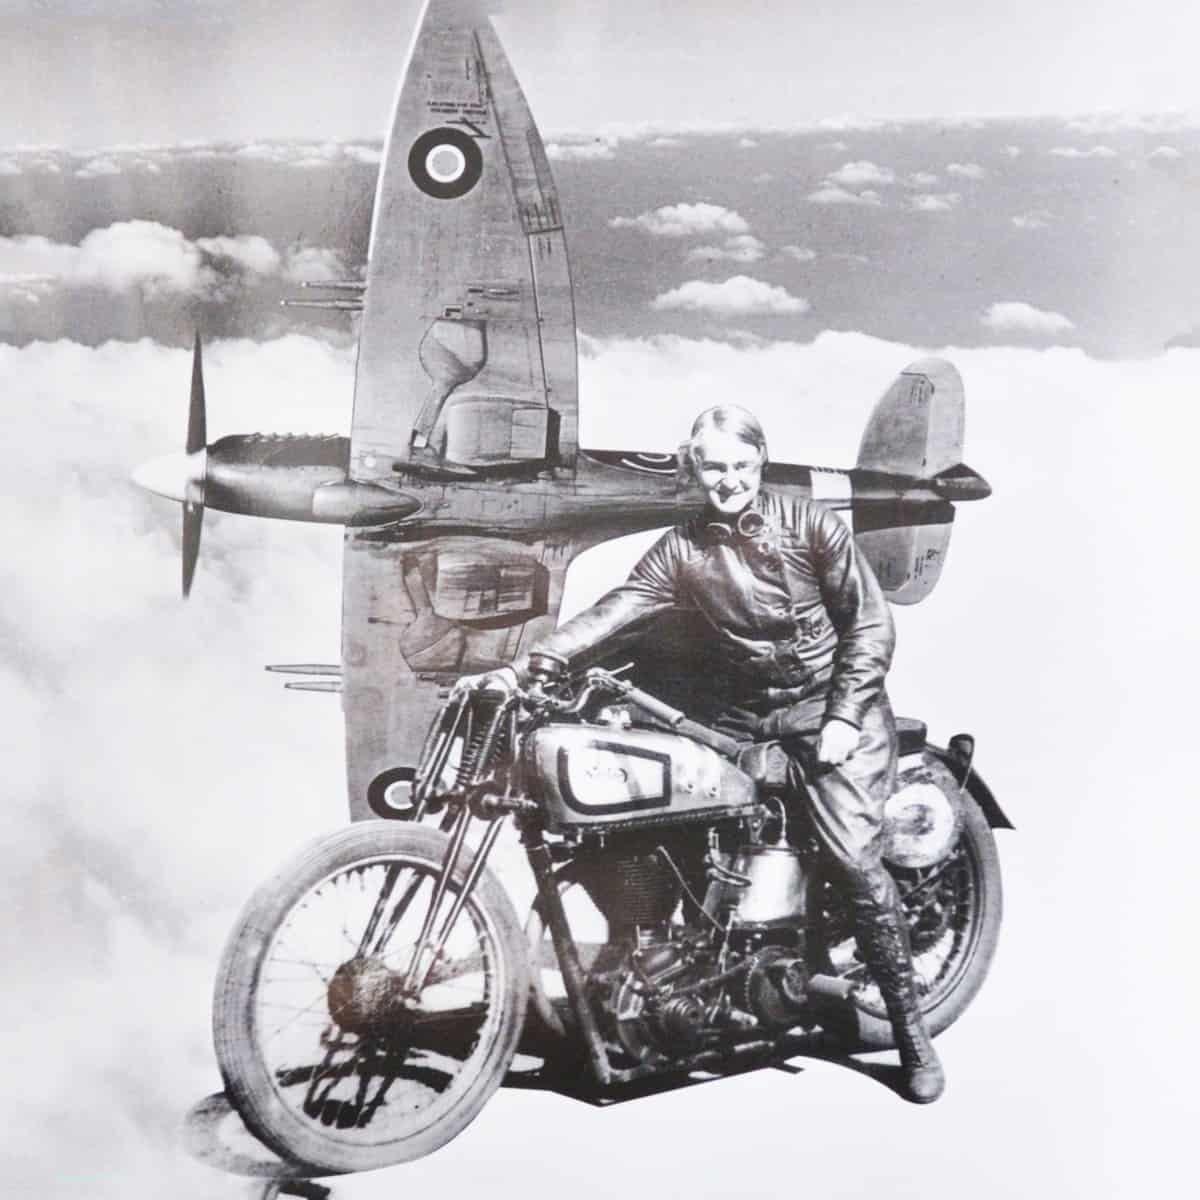 Beatrice 'Tilly' Shilling, who improved the safety of the Spitfire Image: University of Manchester